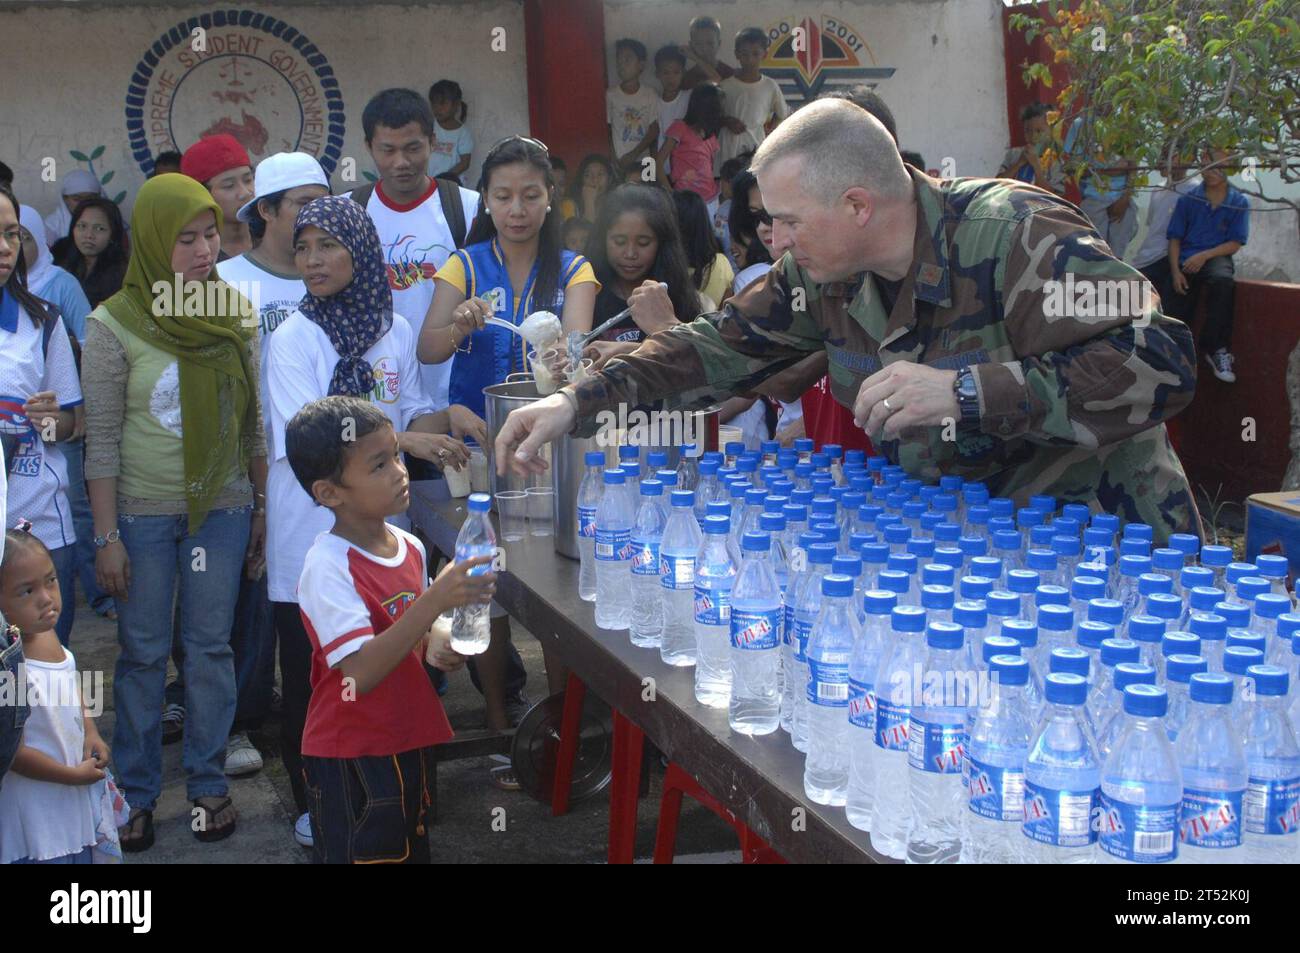 0712157286M-033 ZAMBOANGA CITY, Philippines (Dec. 15, 2007) U.S. Air Force Chaplin, Maj. Philip G. Houser hands out water to the children at MEIN College. Sailors, Airmen and Soldiers assigned to Joint Special Operations Task Force-Philippines (JSOTF-P) assisted MEIN College, INC. and the Kiwanis Club of METRO Zamboanga in handing out presents for the Holidays at the as part of their annual community outreach program.  U.S. Navy Stock Photo